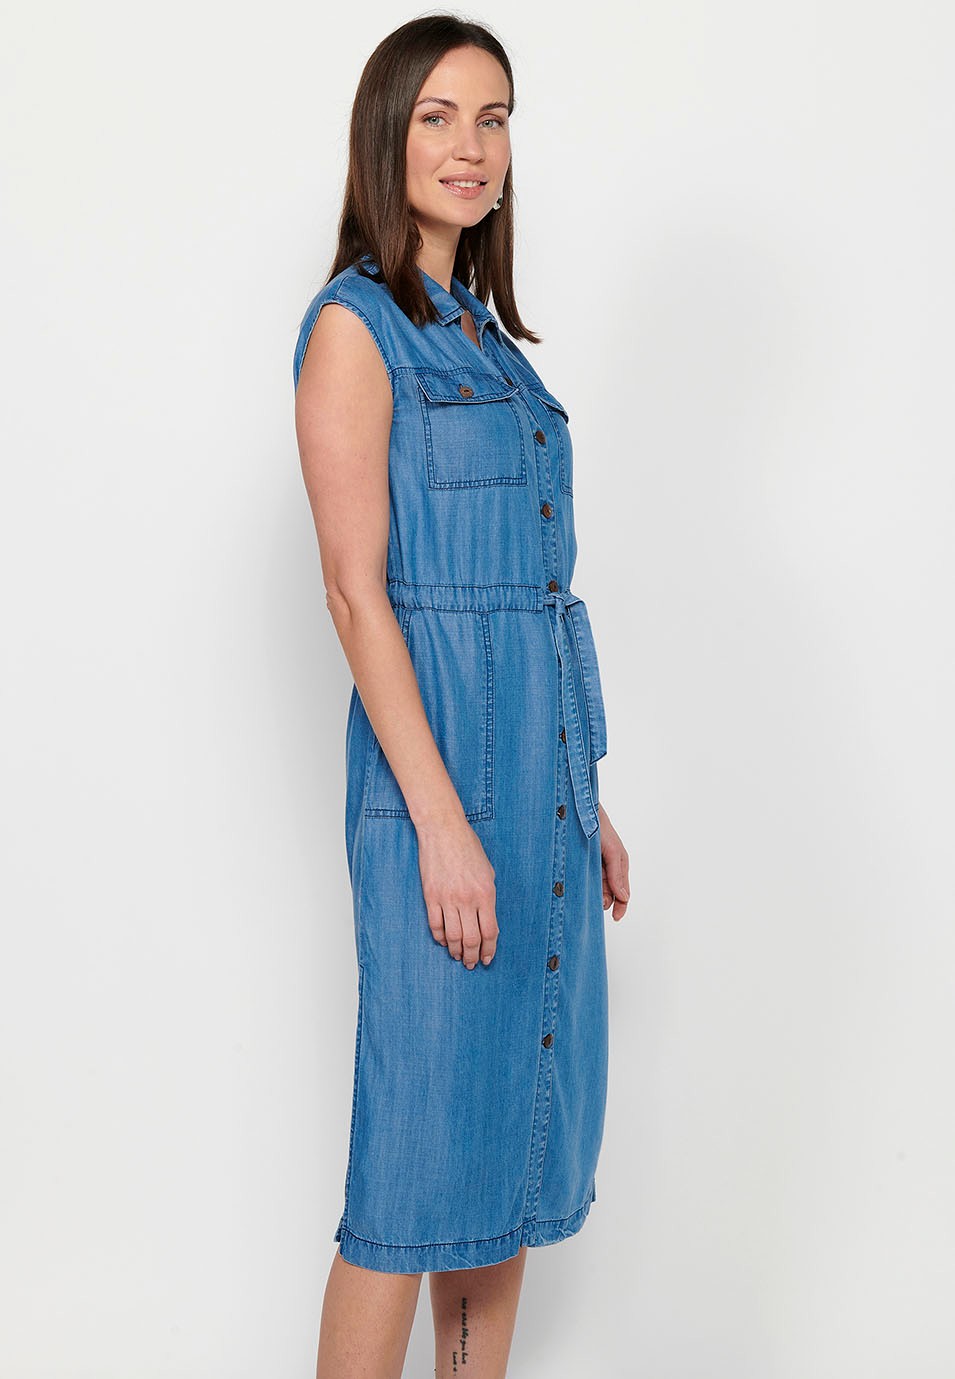 Women's Sleeveless Shirt Style Long Dress with Adjustable Waist with Drawstring and Button Front Closure in Blue 2